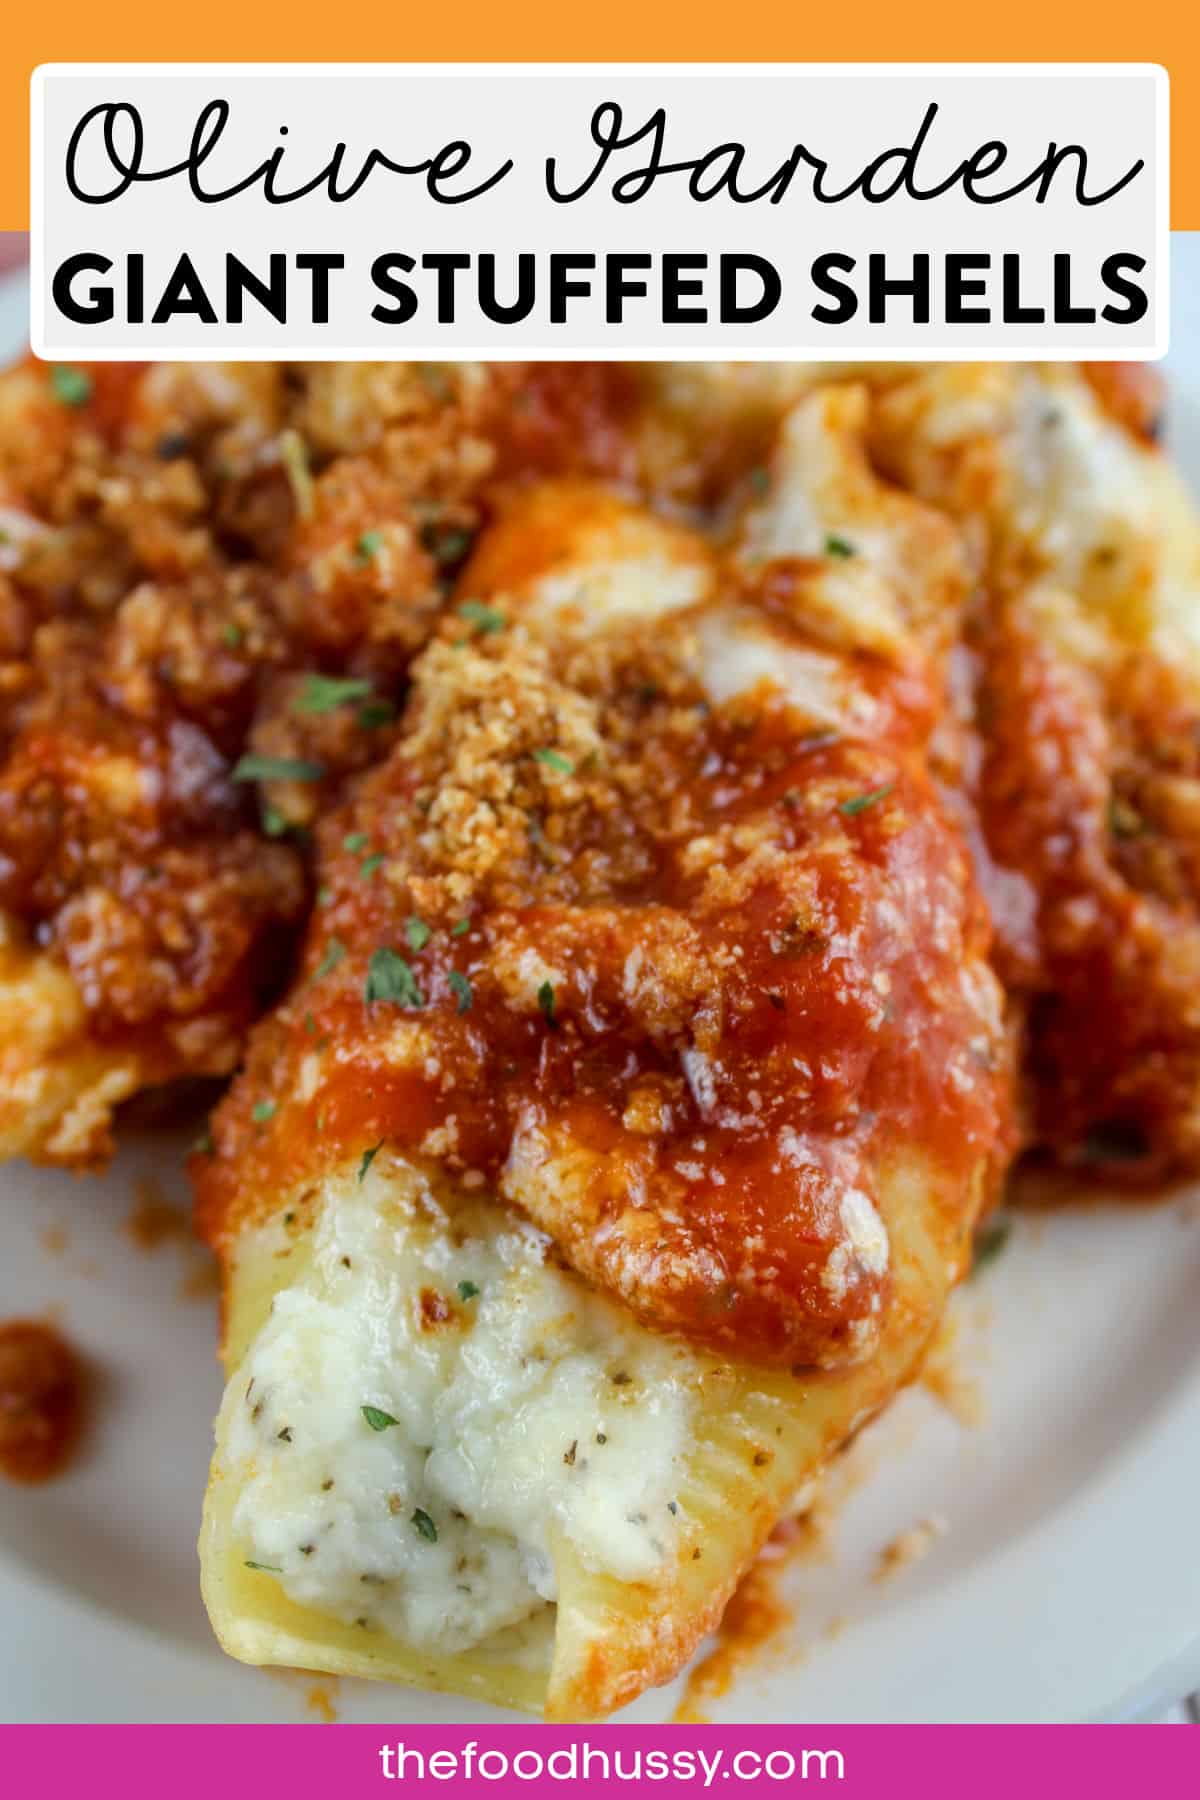 Olive Garden Stuffed Shells are one of their most popular dishes and one of my most popular recipes! They’re cheesy, saucy and delicious – plus – easy to make!  via @foodhussy